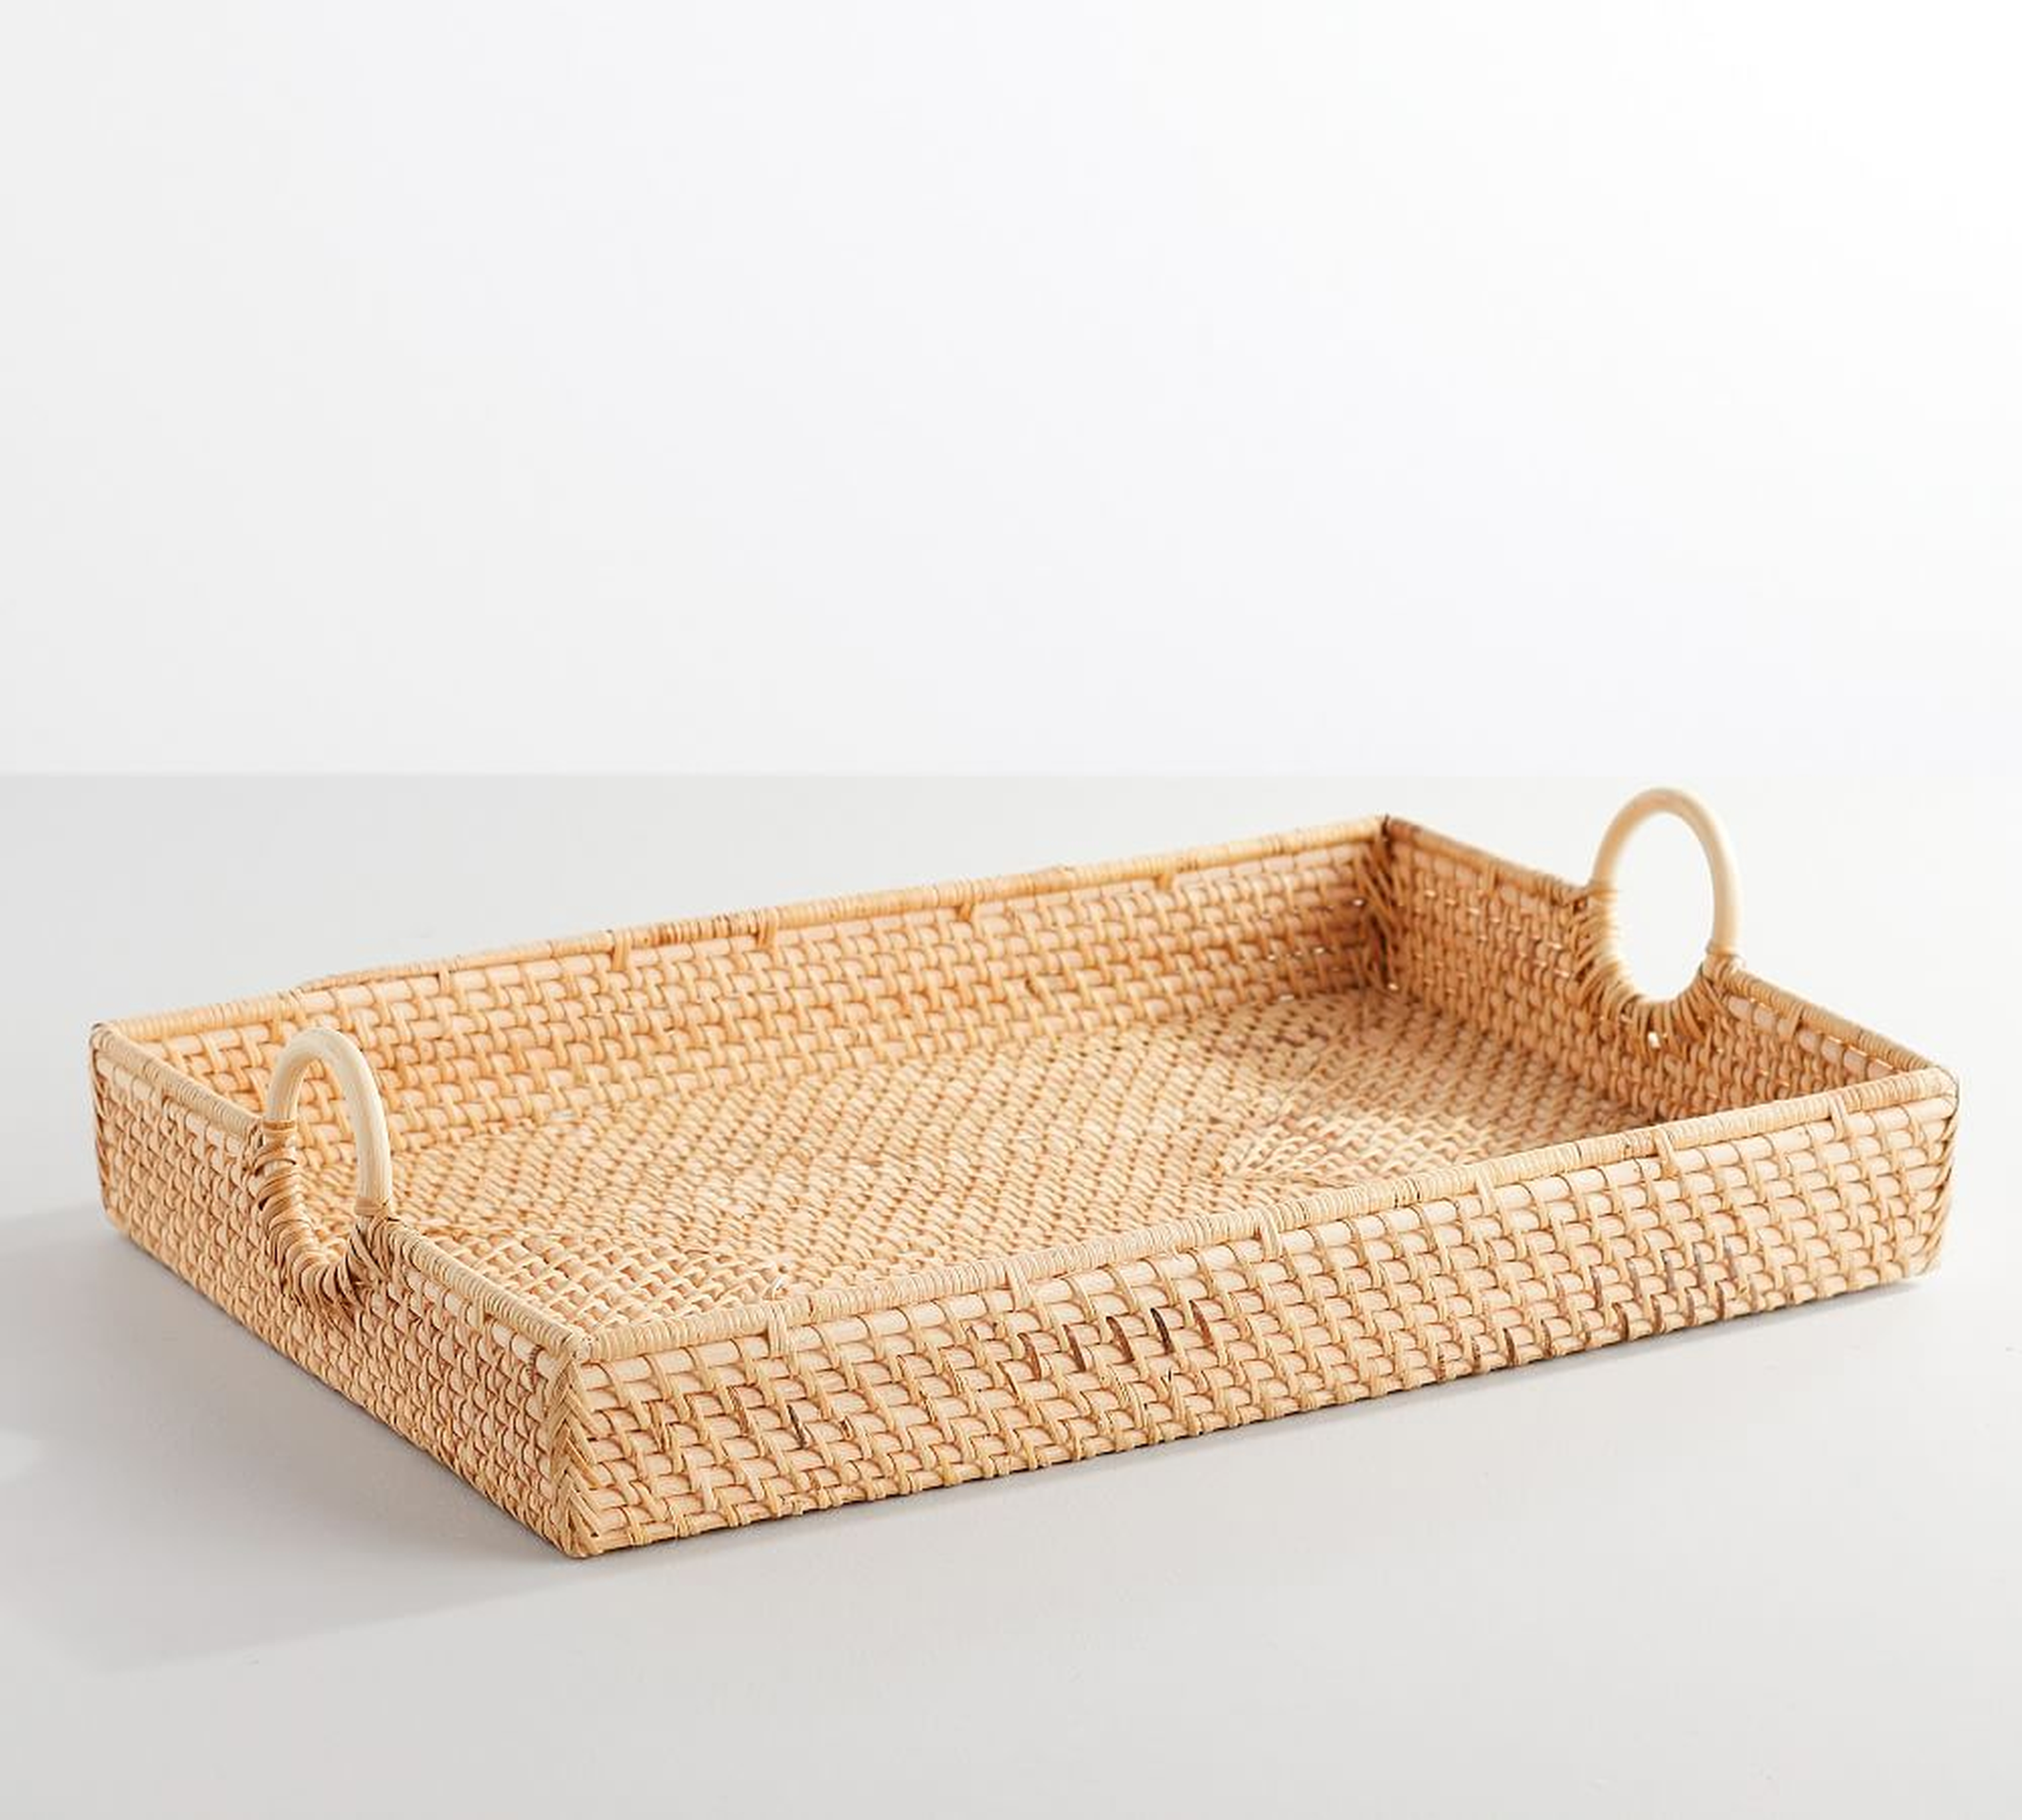 Monique Lhuillier Weaverly Woven Rattan Tray, Natural - Pottery Barn